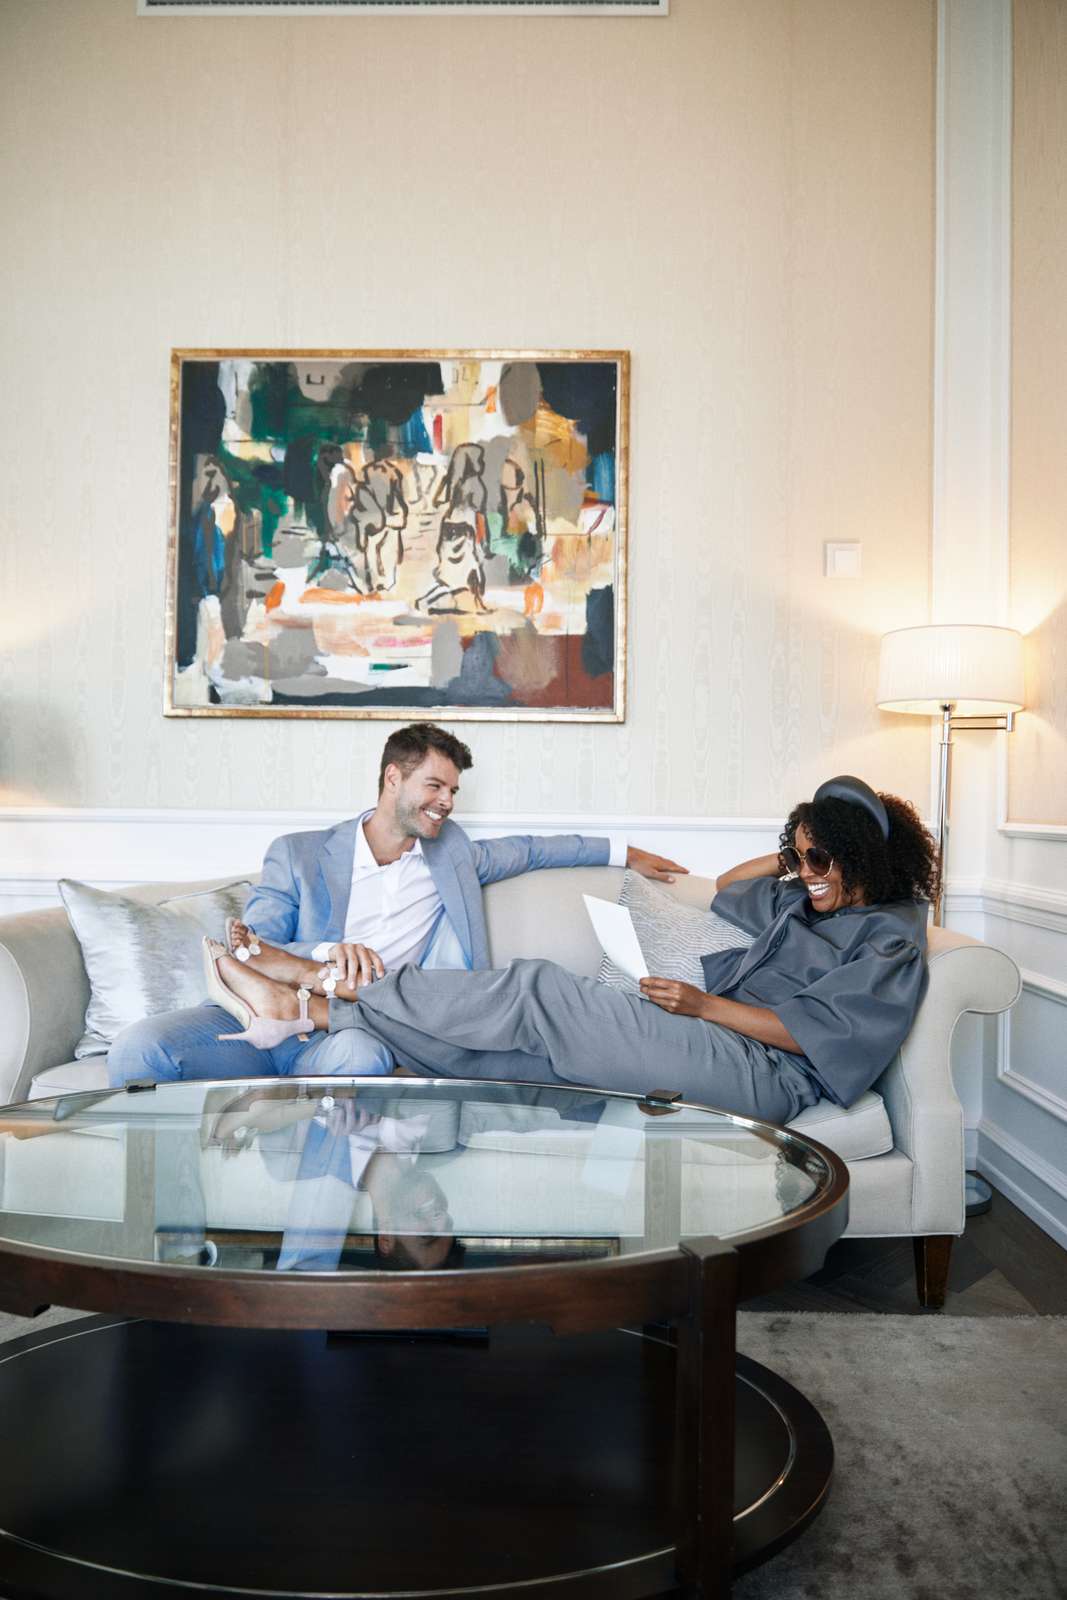 24 couple laughing on sofa in suite .jpg